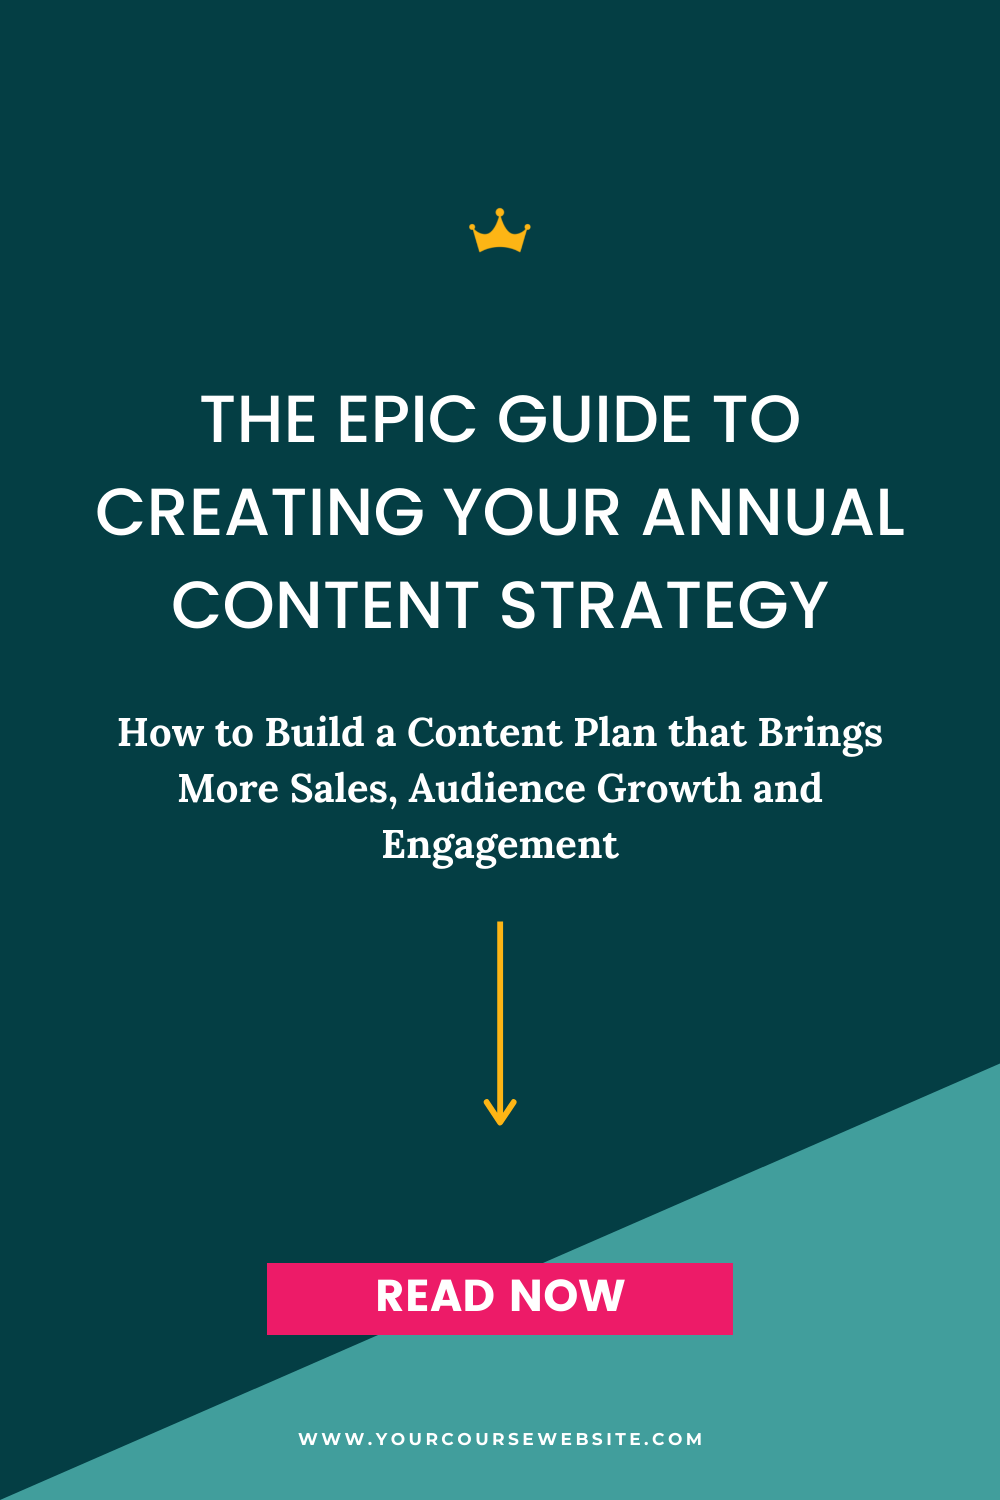 The Epic Guide to Creating Your Annual Content Strategy